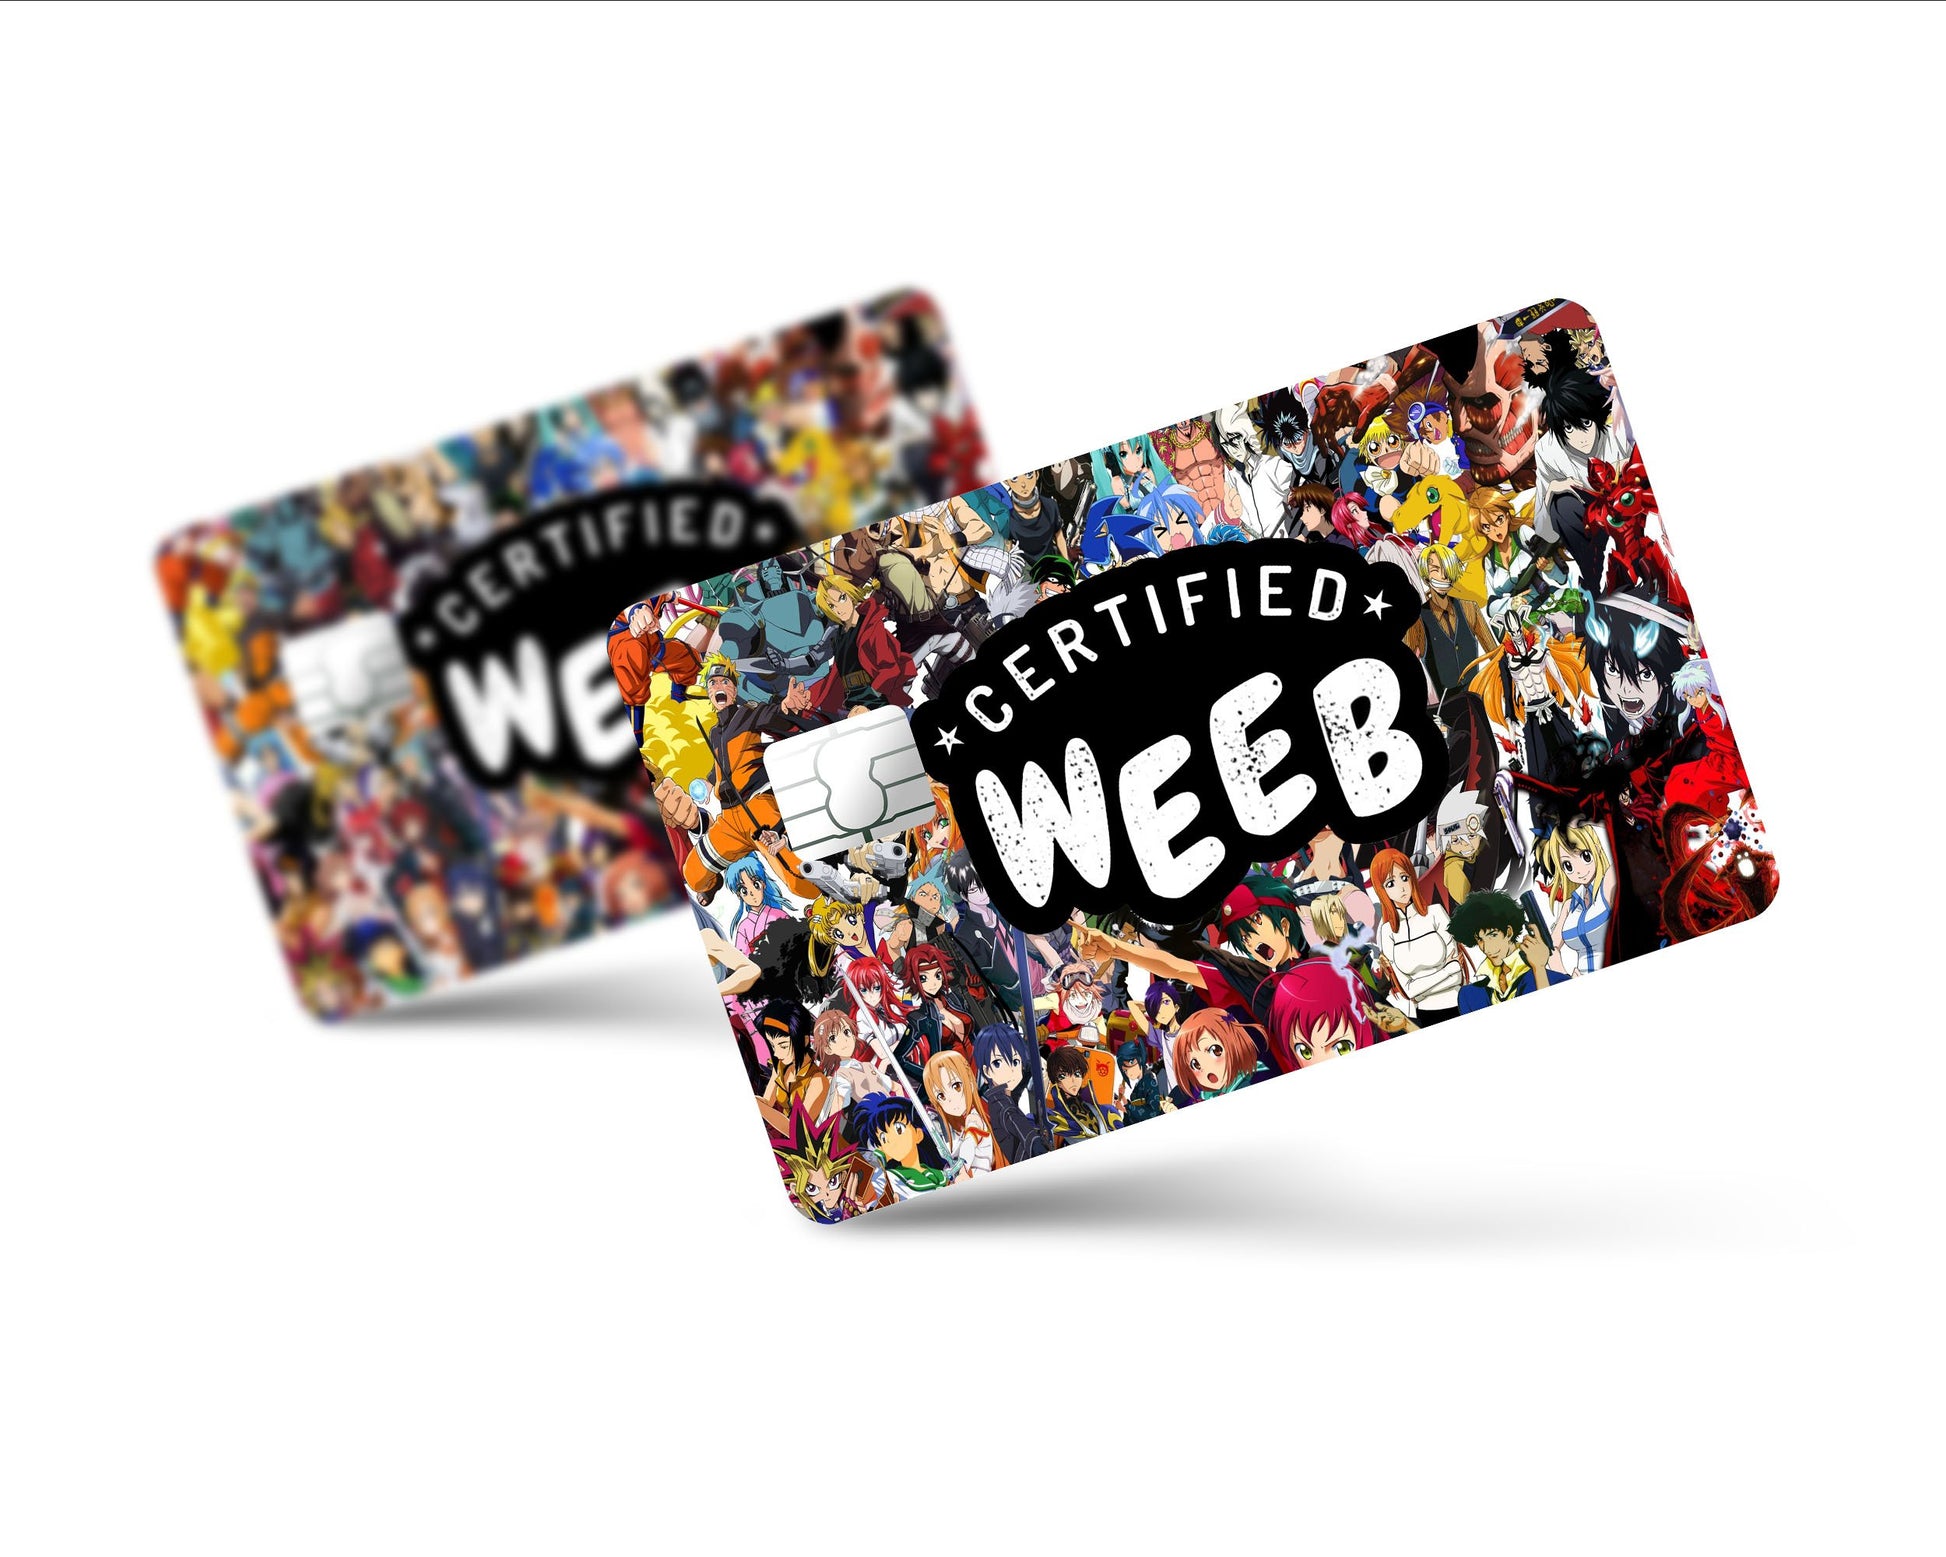 How to apply credit card skins #anime #pokemon #stickers #weeb 